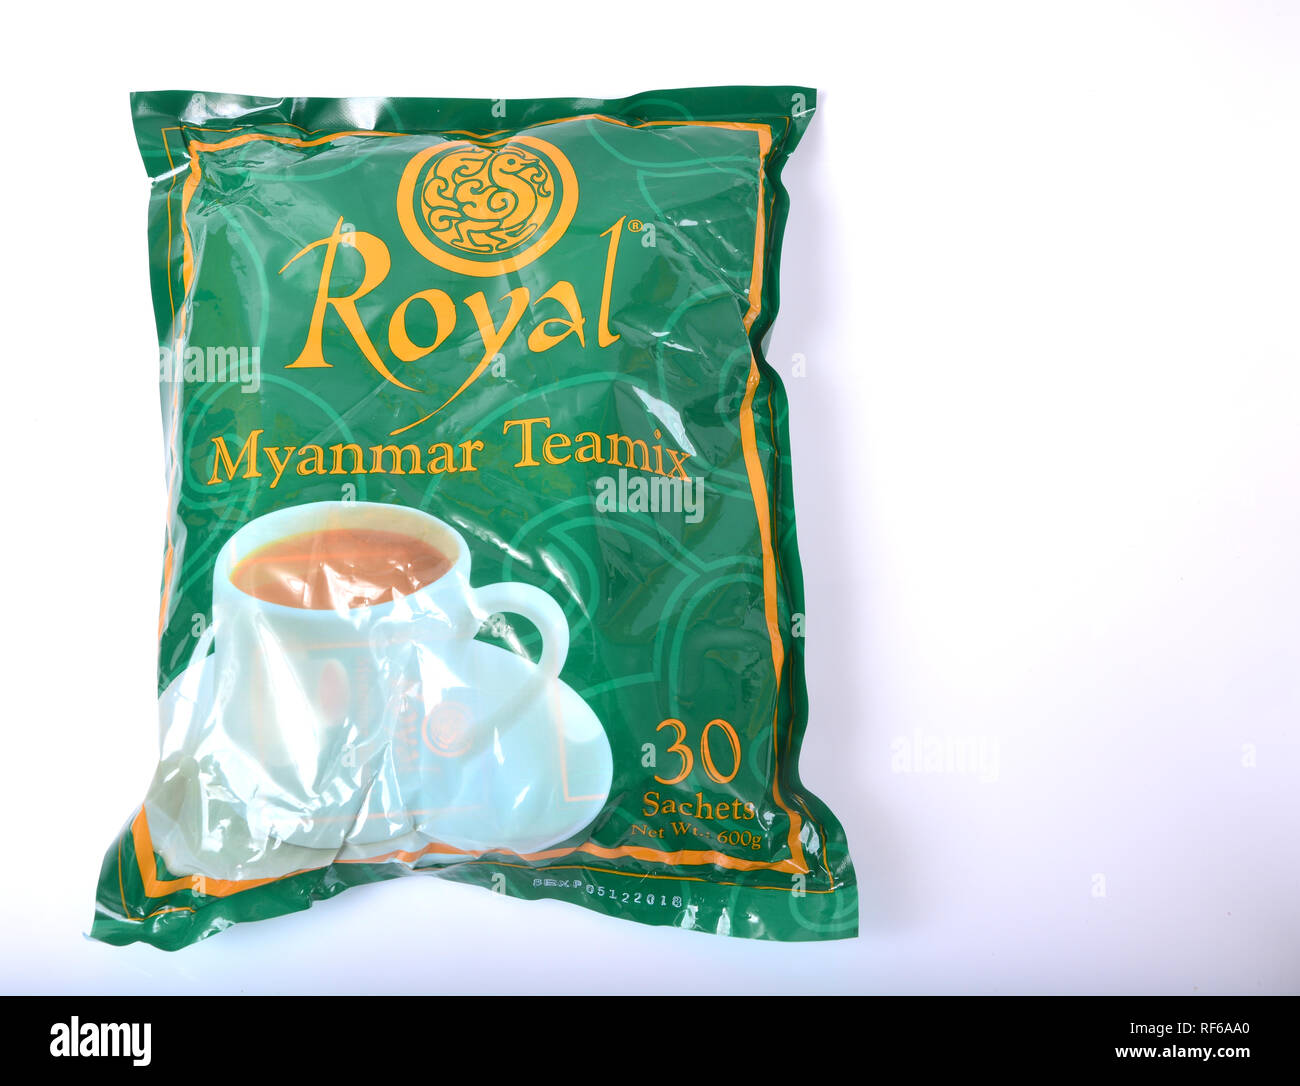 Kanchanaburi Thailand A March 7 17 Products From The Thai Border Myanmar Place Of Orign Royal Myanmar Teamix Product Stock Photo Alamy